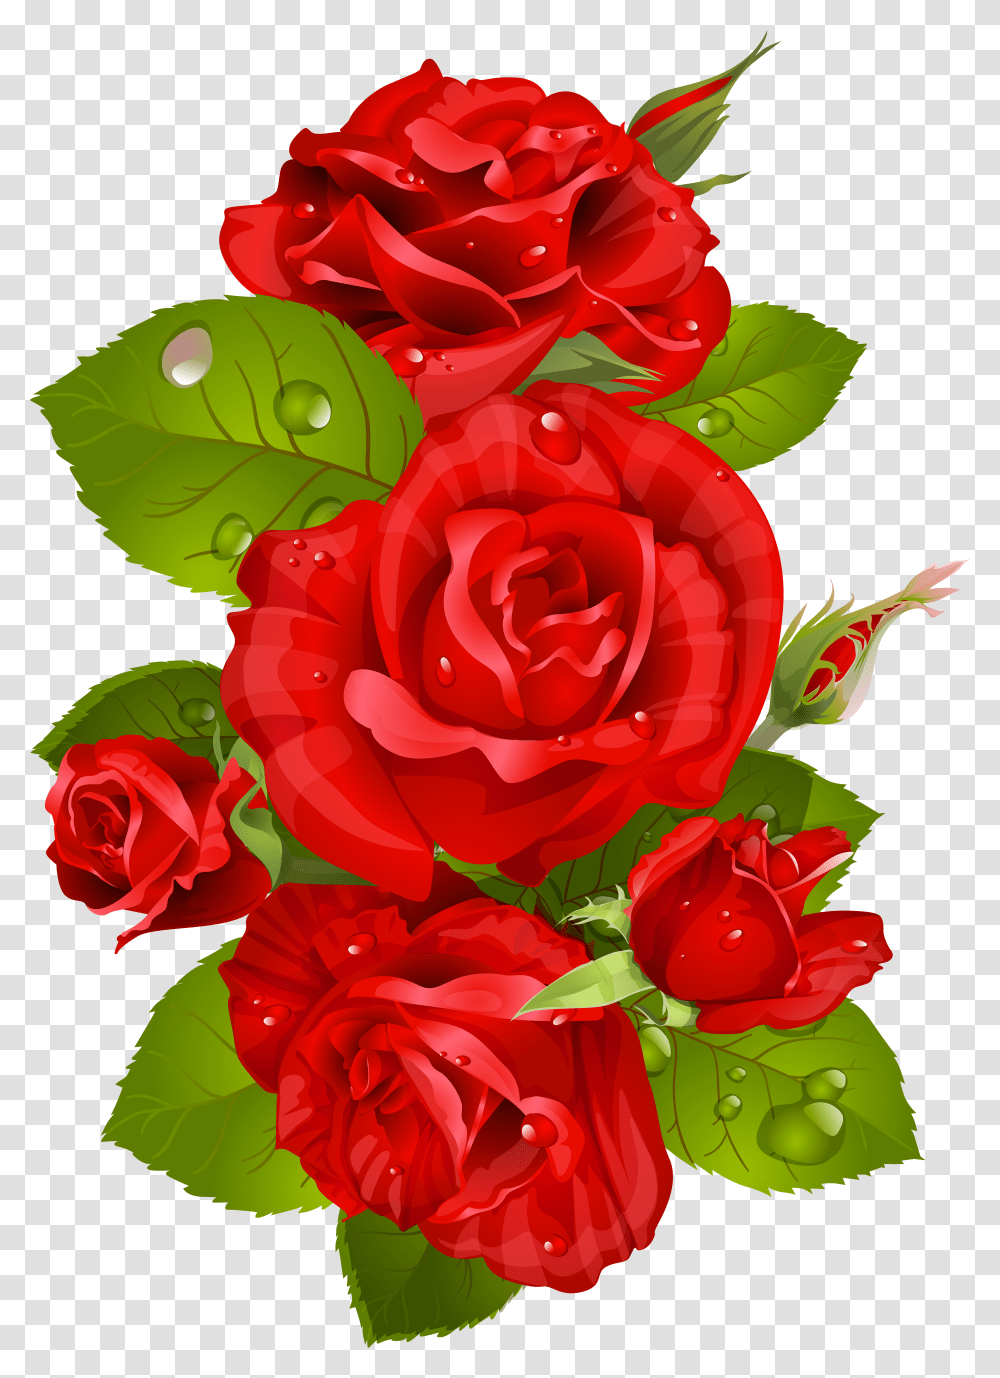 Red Rose Clipart Beauty And The Beast Roja Flowers Photos Hd Download Transparent Png